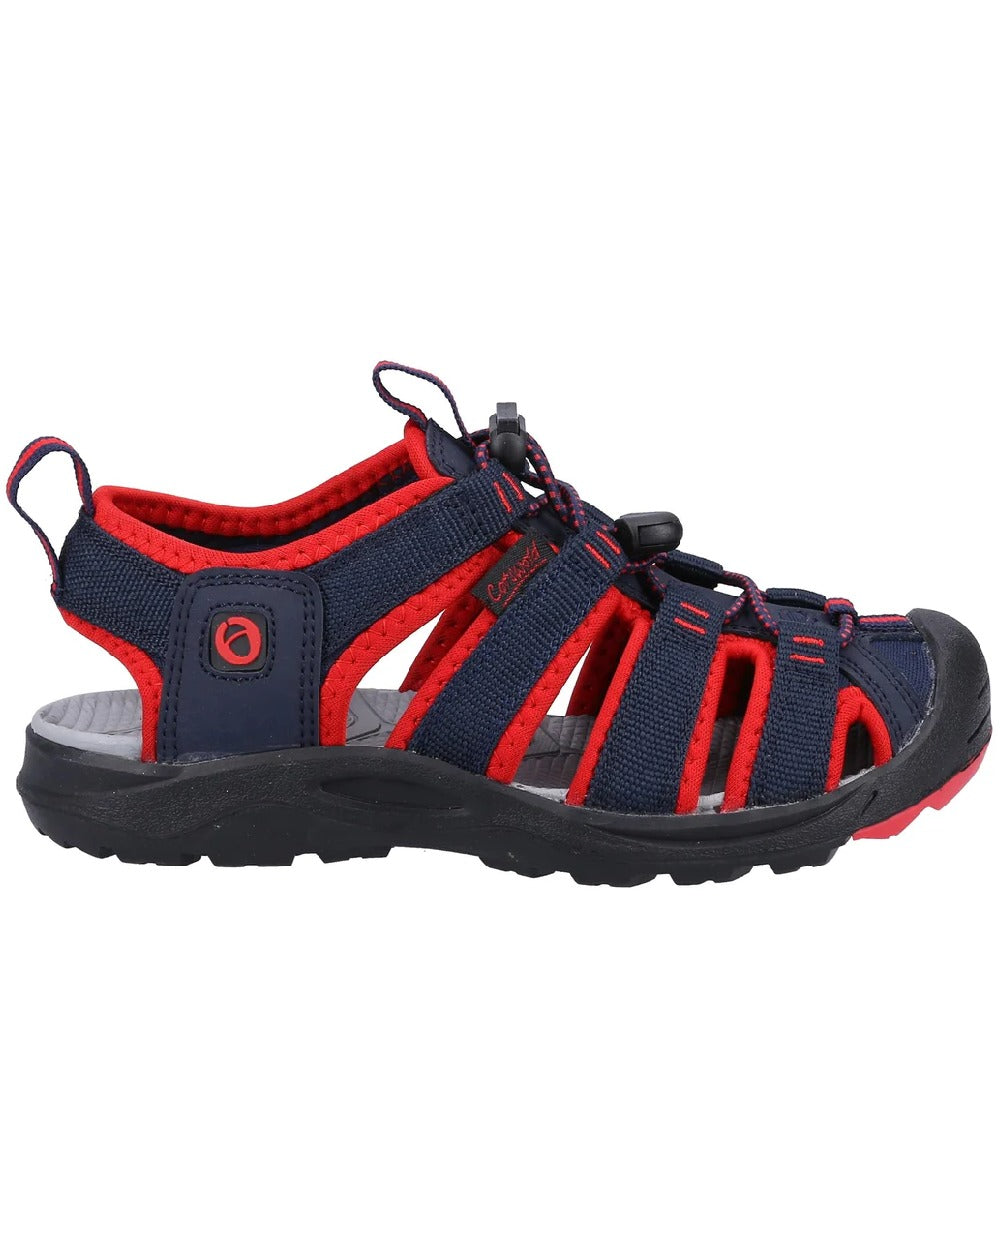 Cotswold Childrens Marshfield Recycled Sandals in Navy 